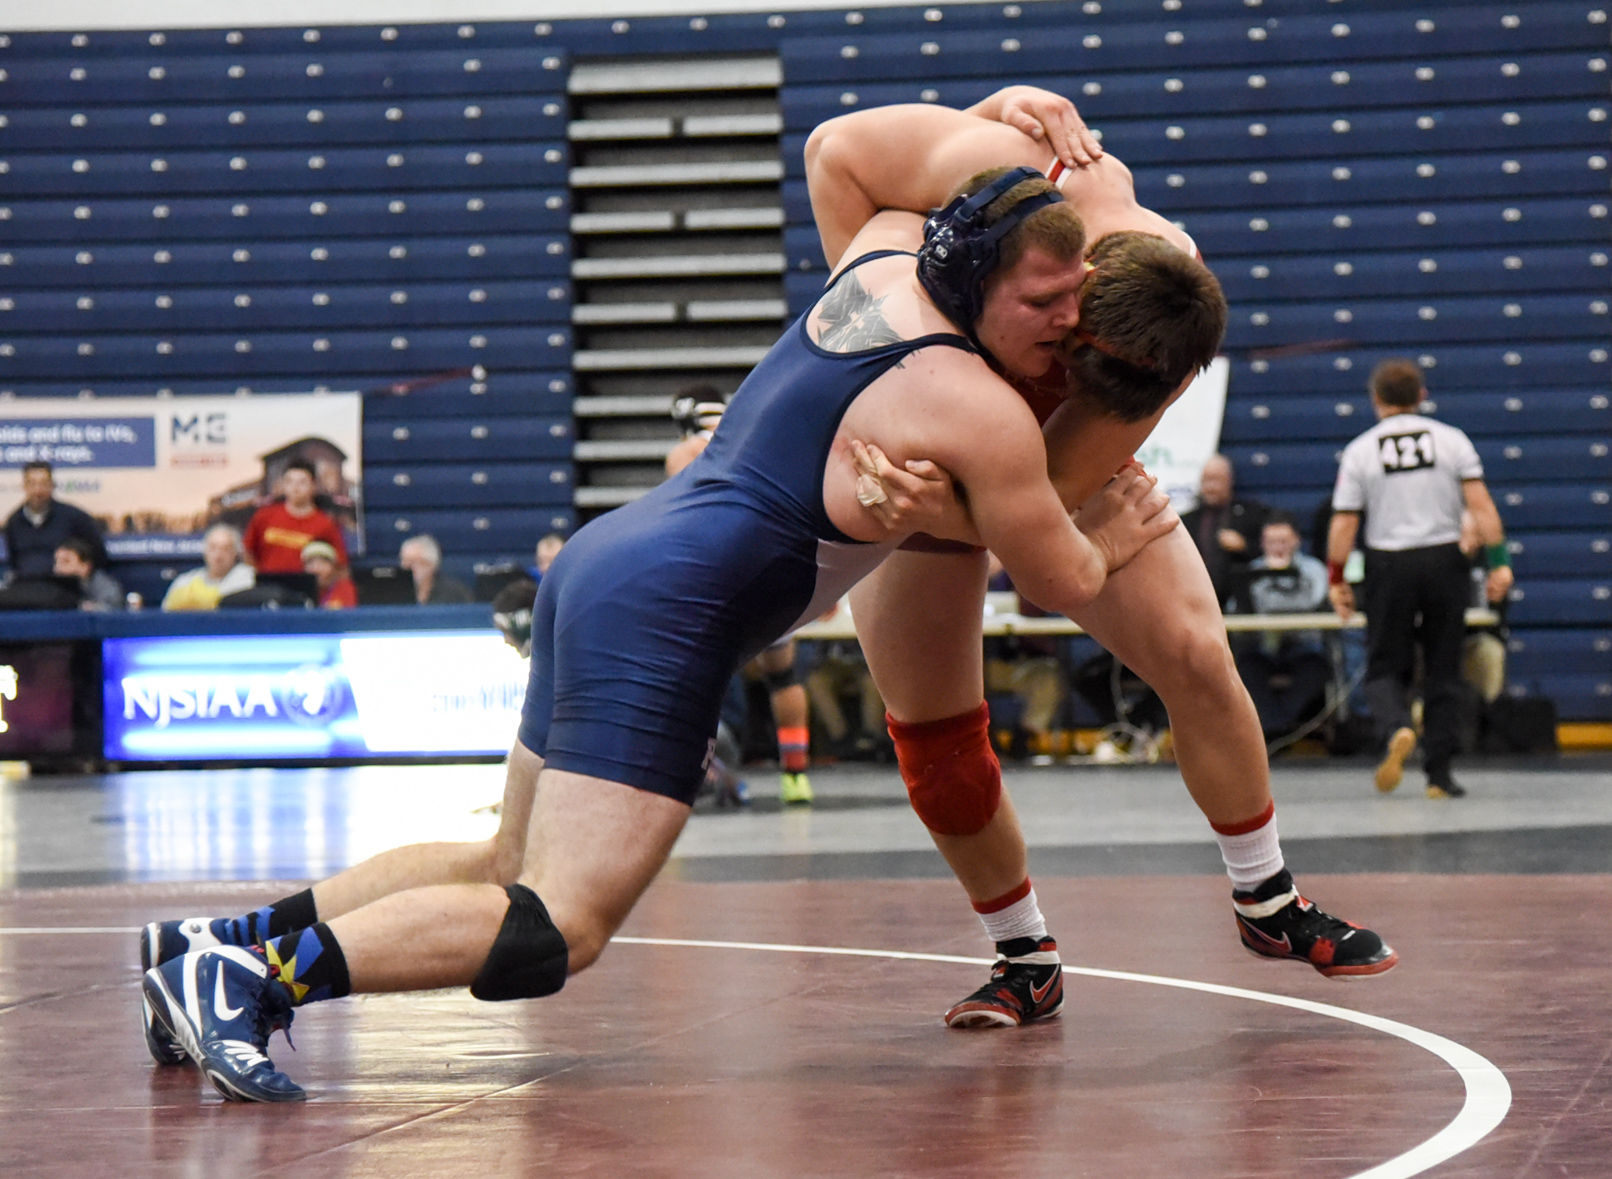 A weight-by-weight look at the high school wrestling favorites this weekend